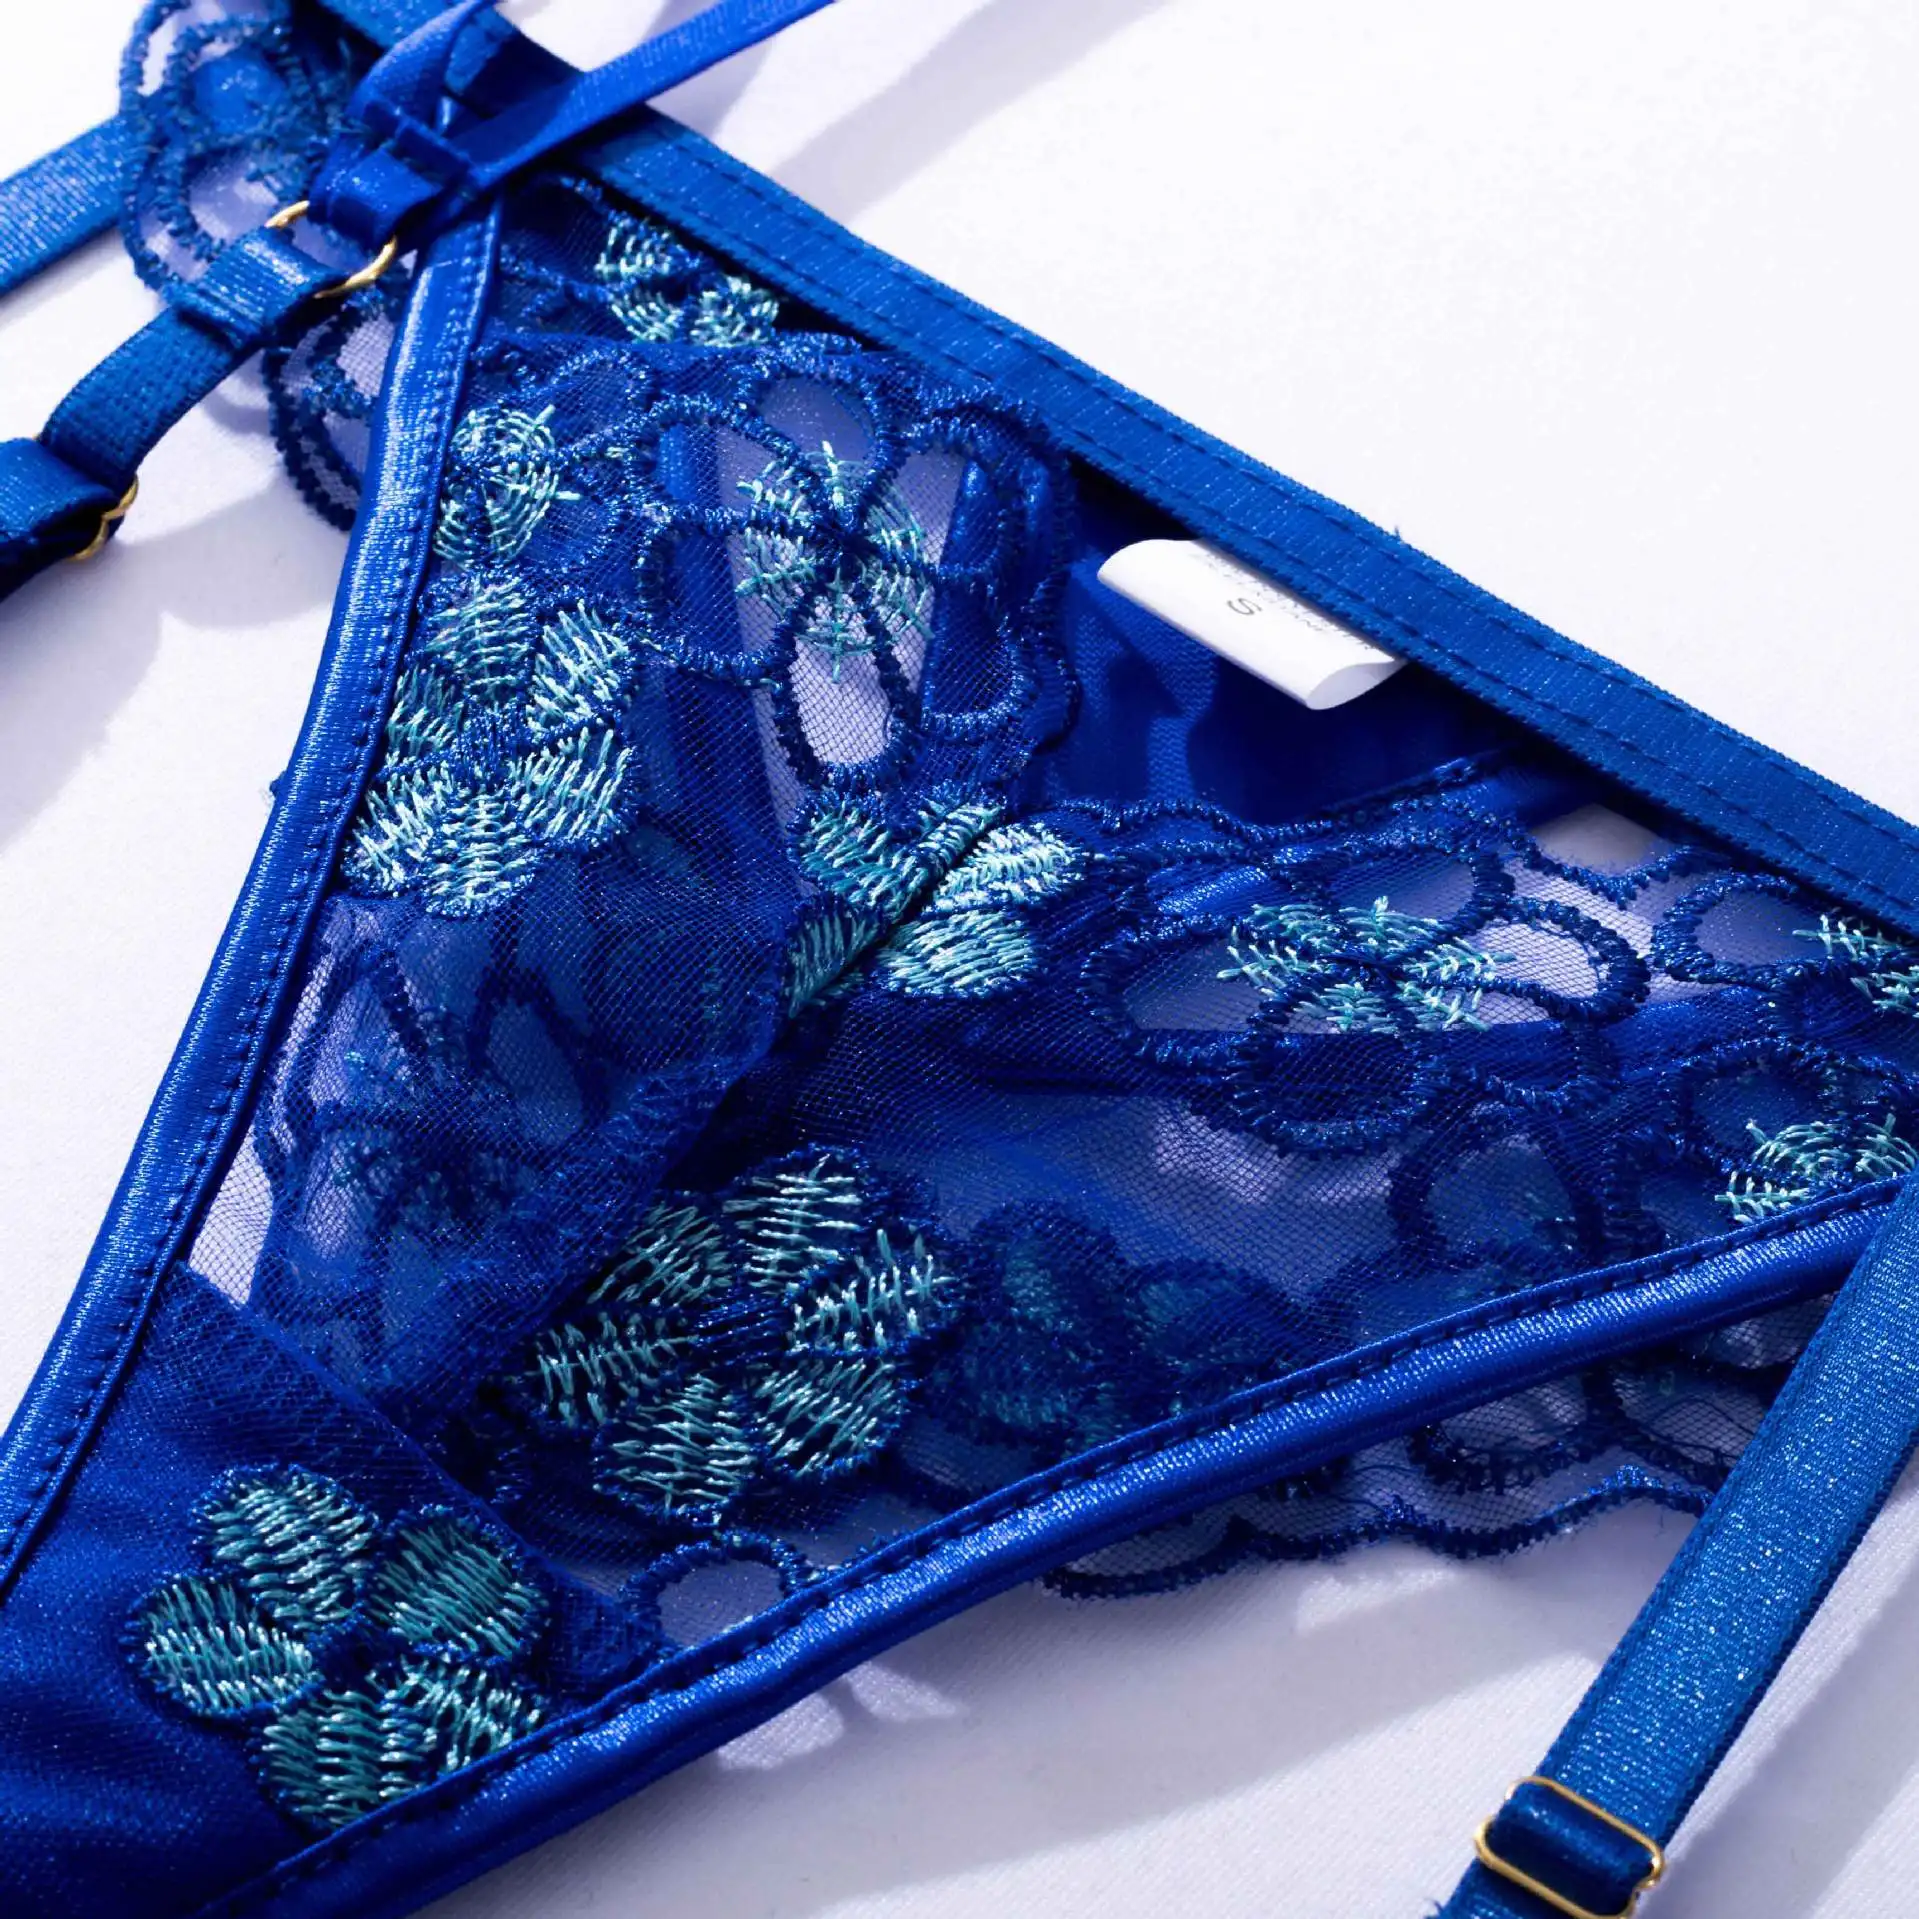 2022 New Arrival Women Sexy Lingerie Lace Sensual Womens Underwear Blue Flowers Embroidery 